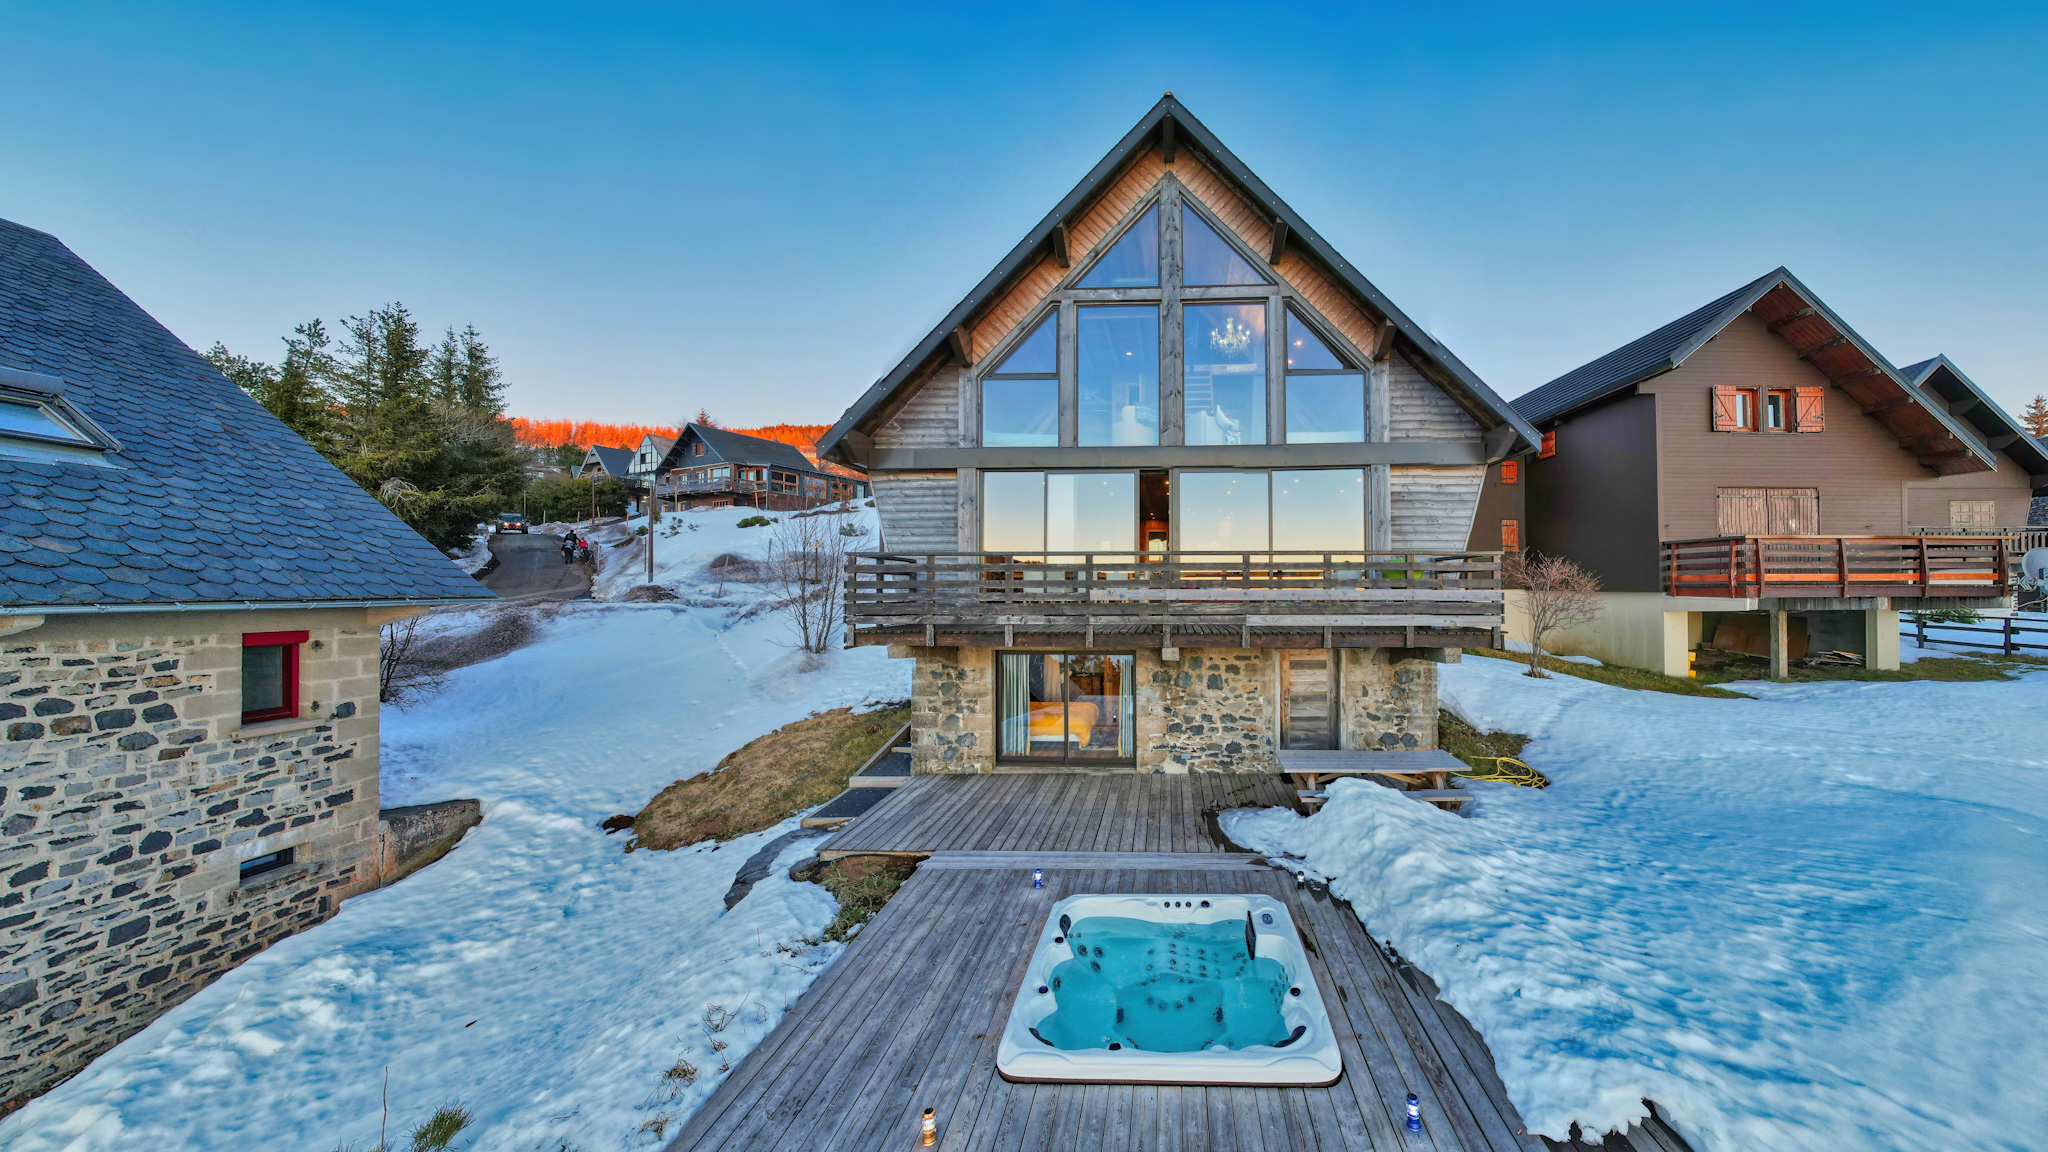 Chalet l'Anorak Super Besse, chalet with outdoor spa in the snow